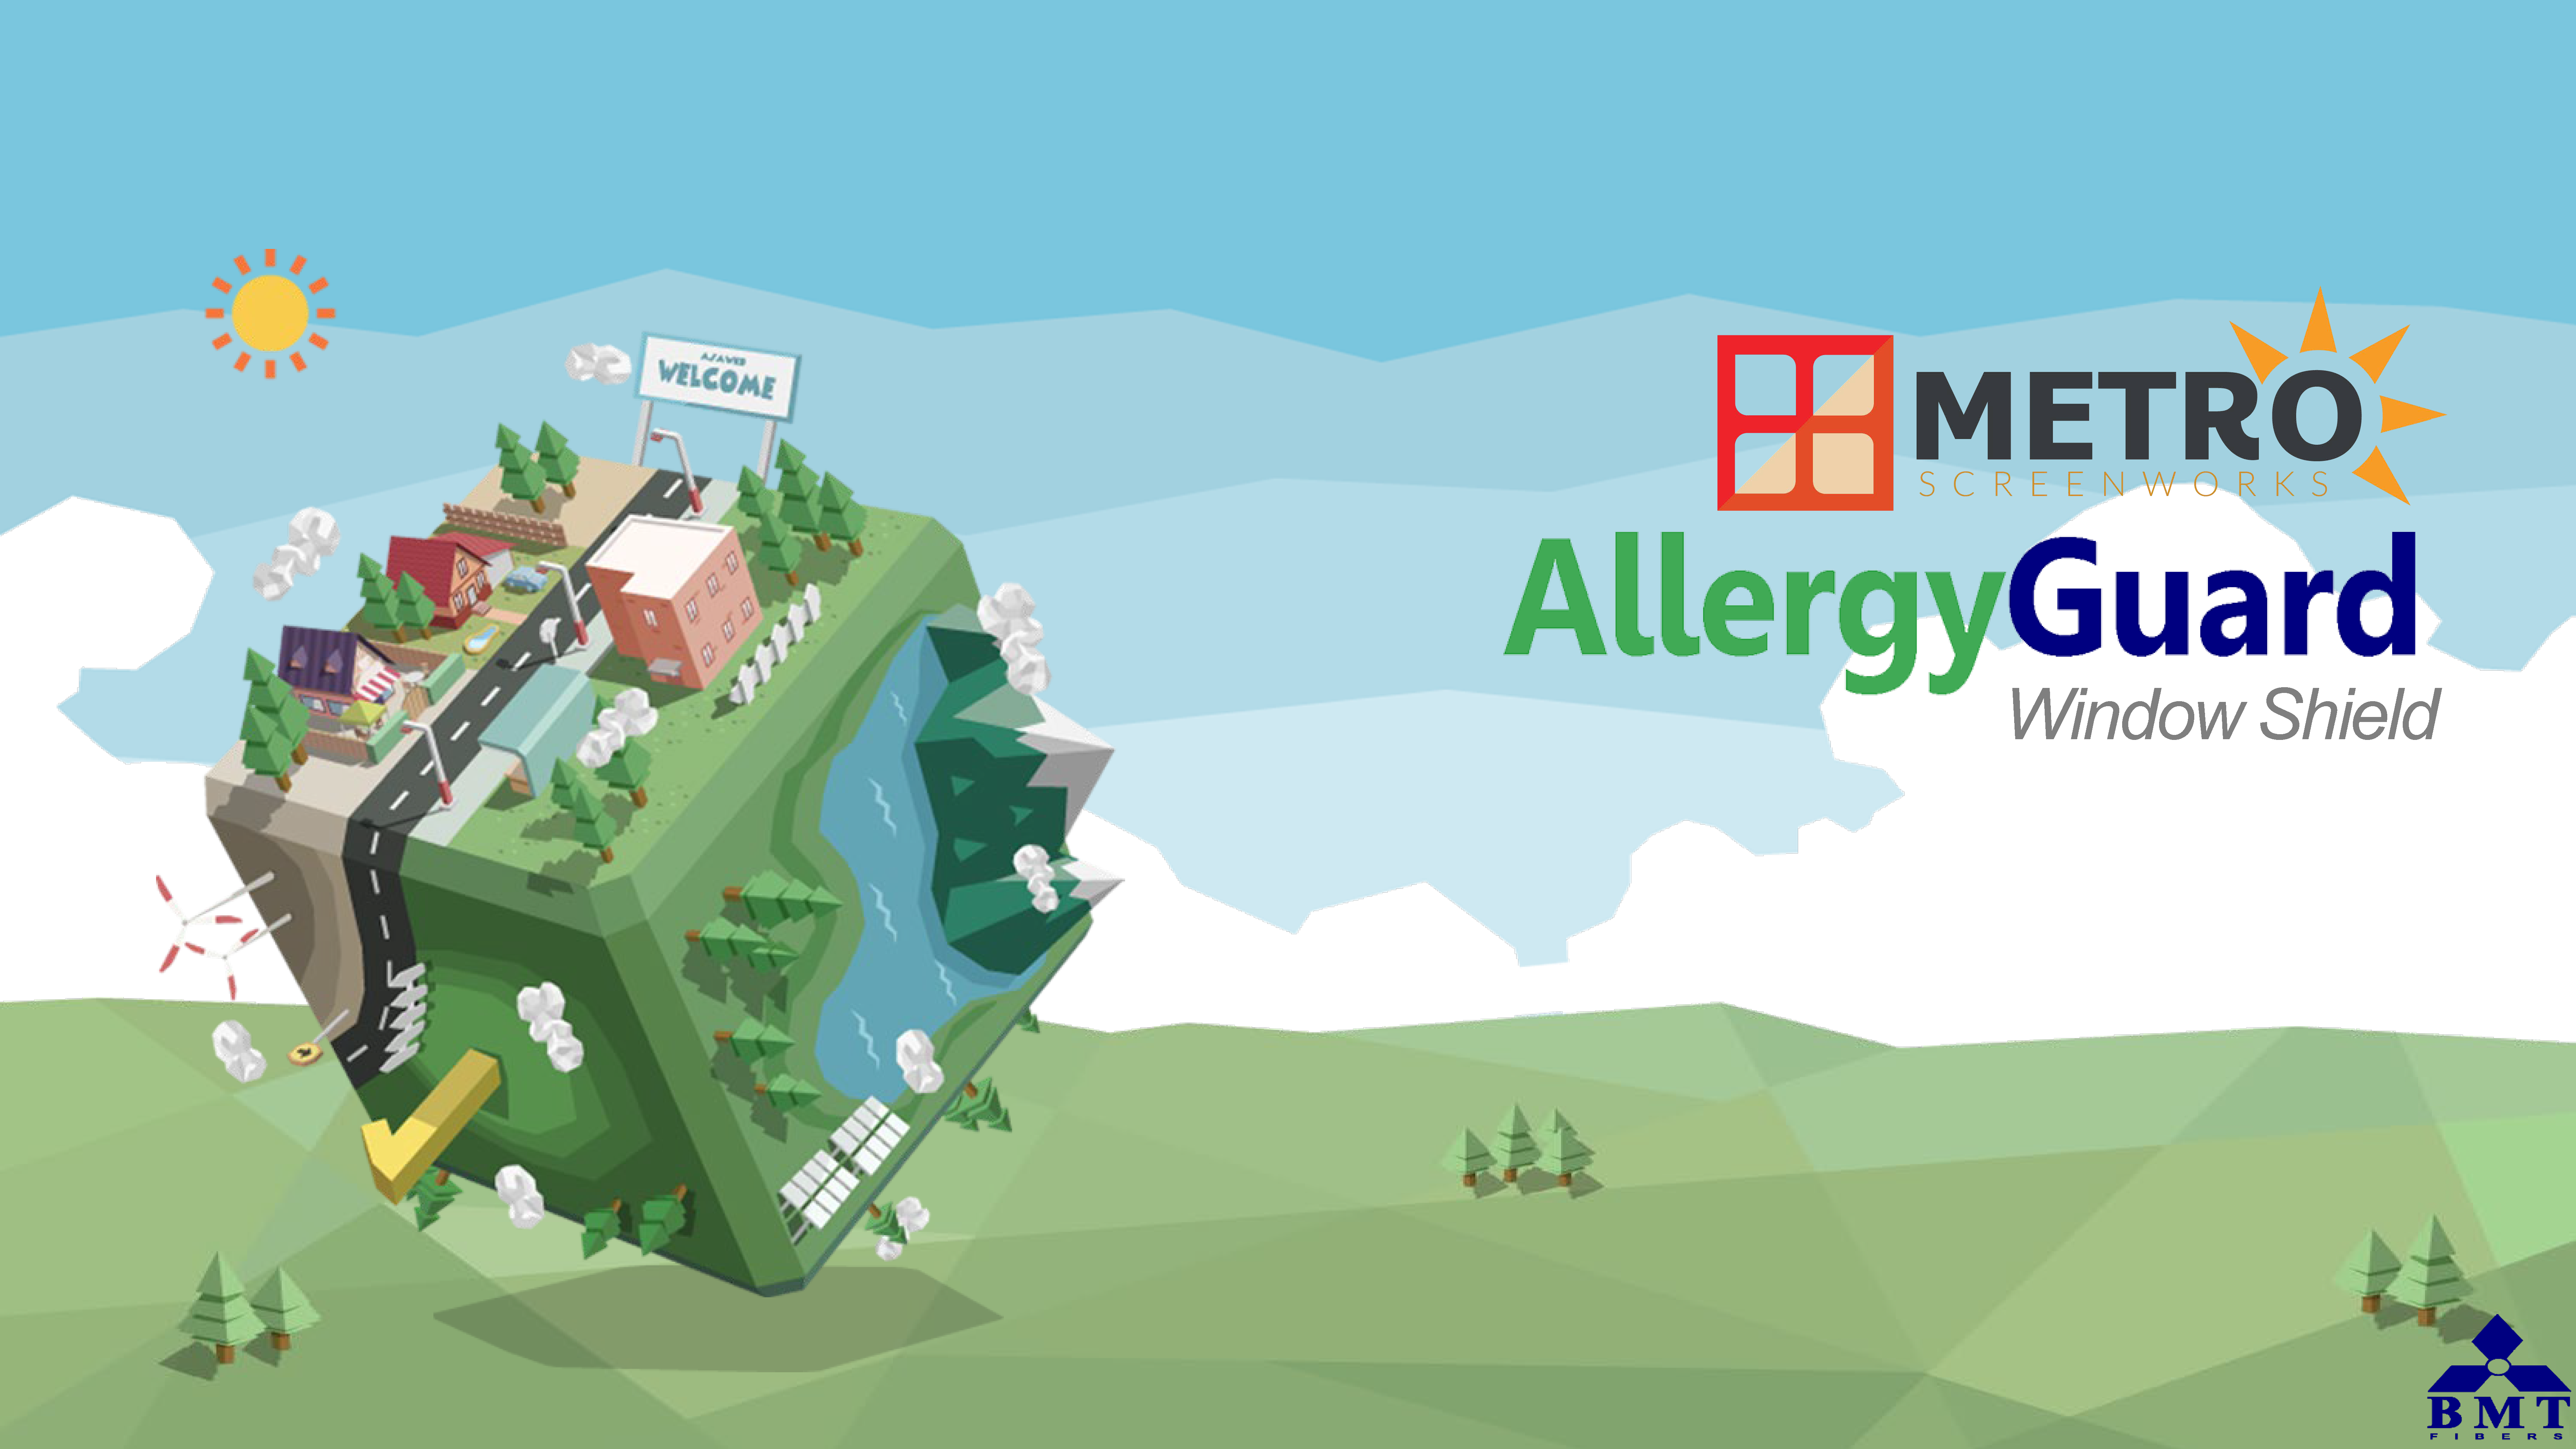 bmt-allergyguard-brochure-metro-page-1.png